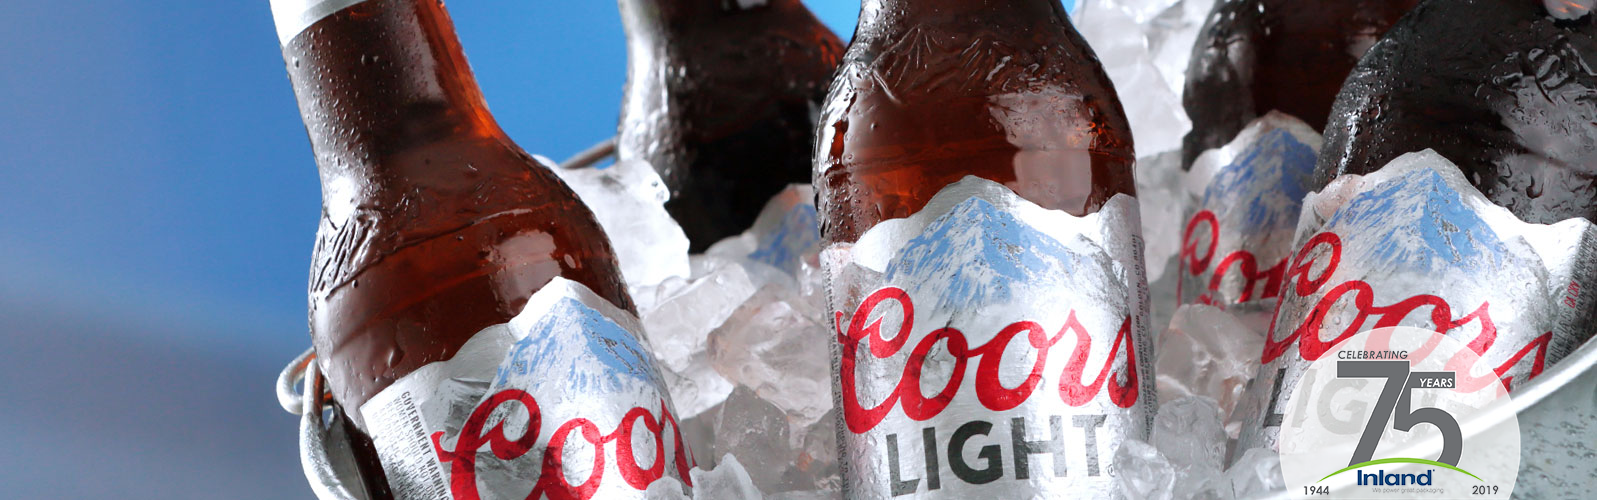 Coors Light mountains label by Inland